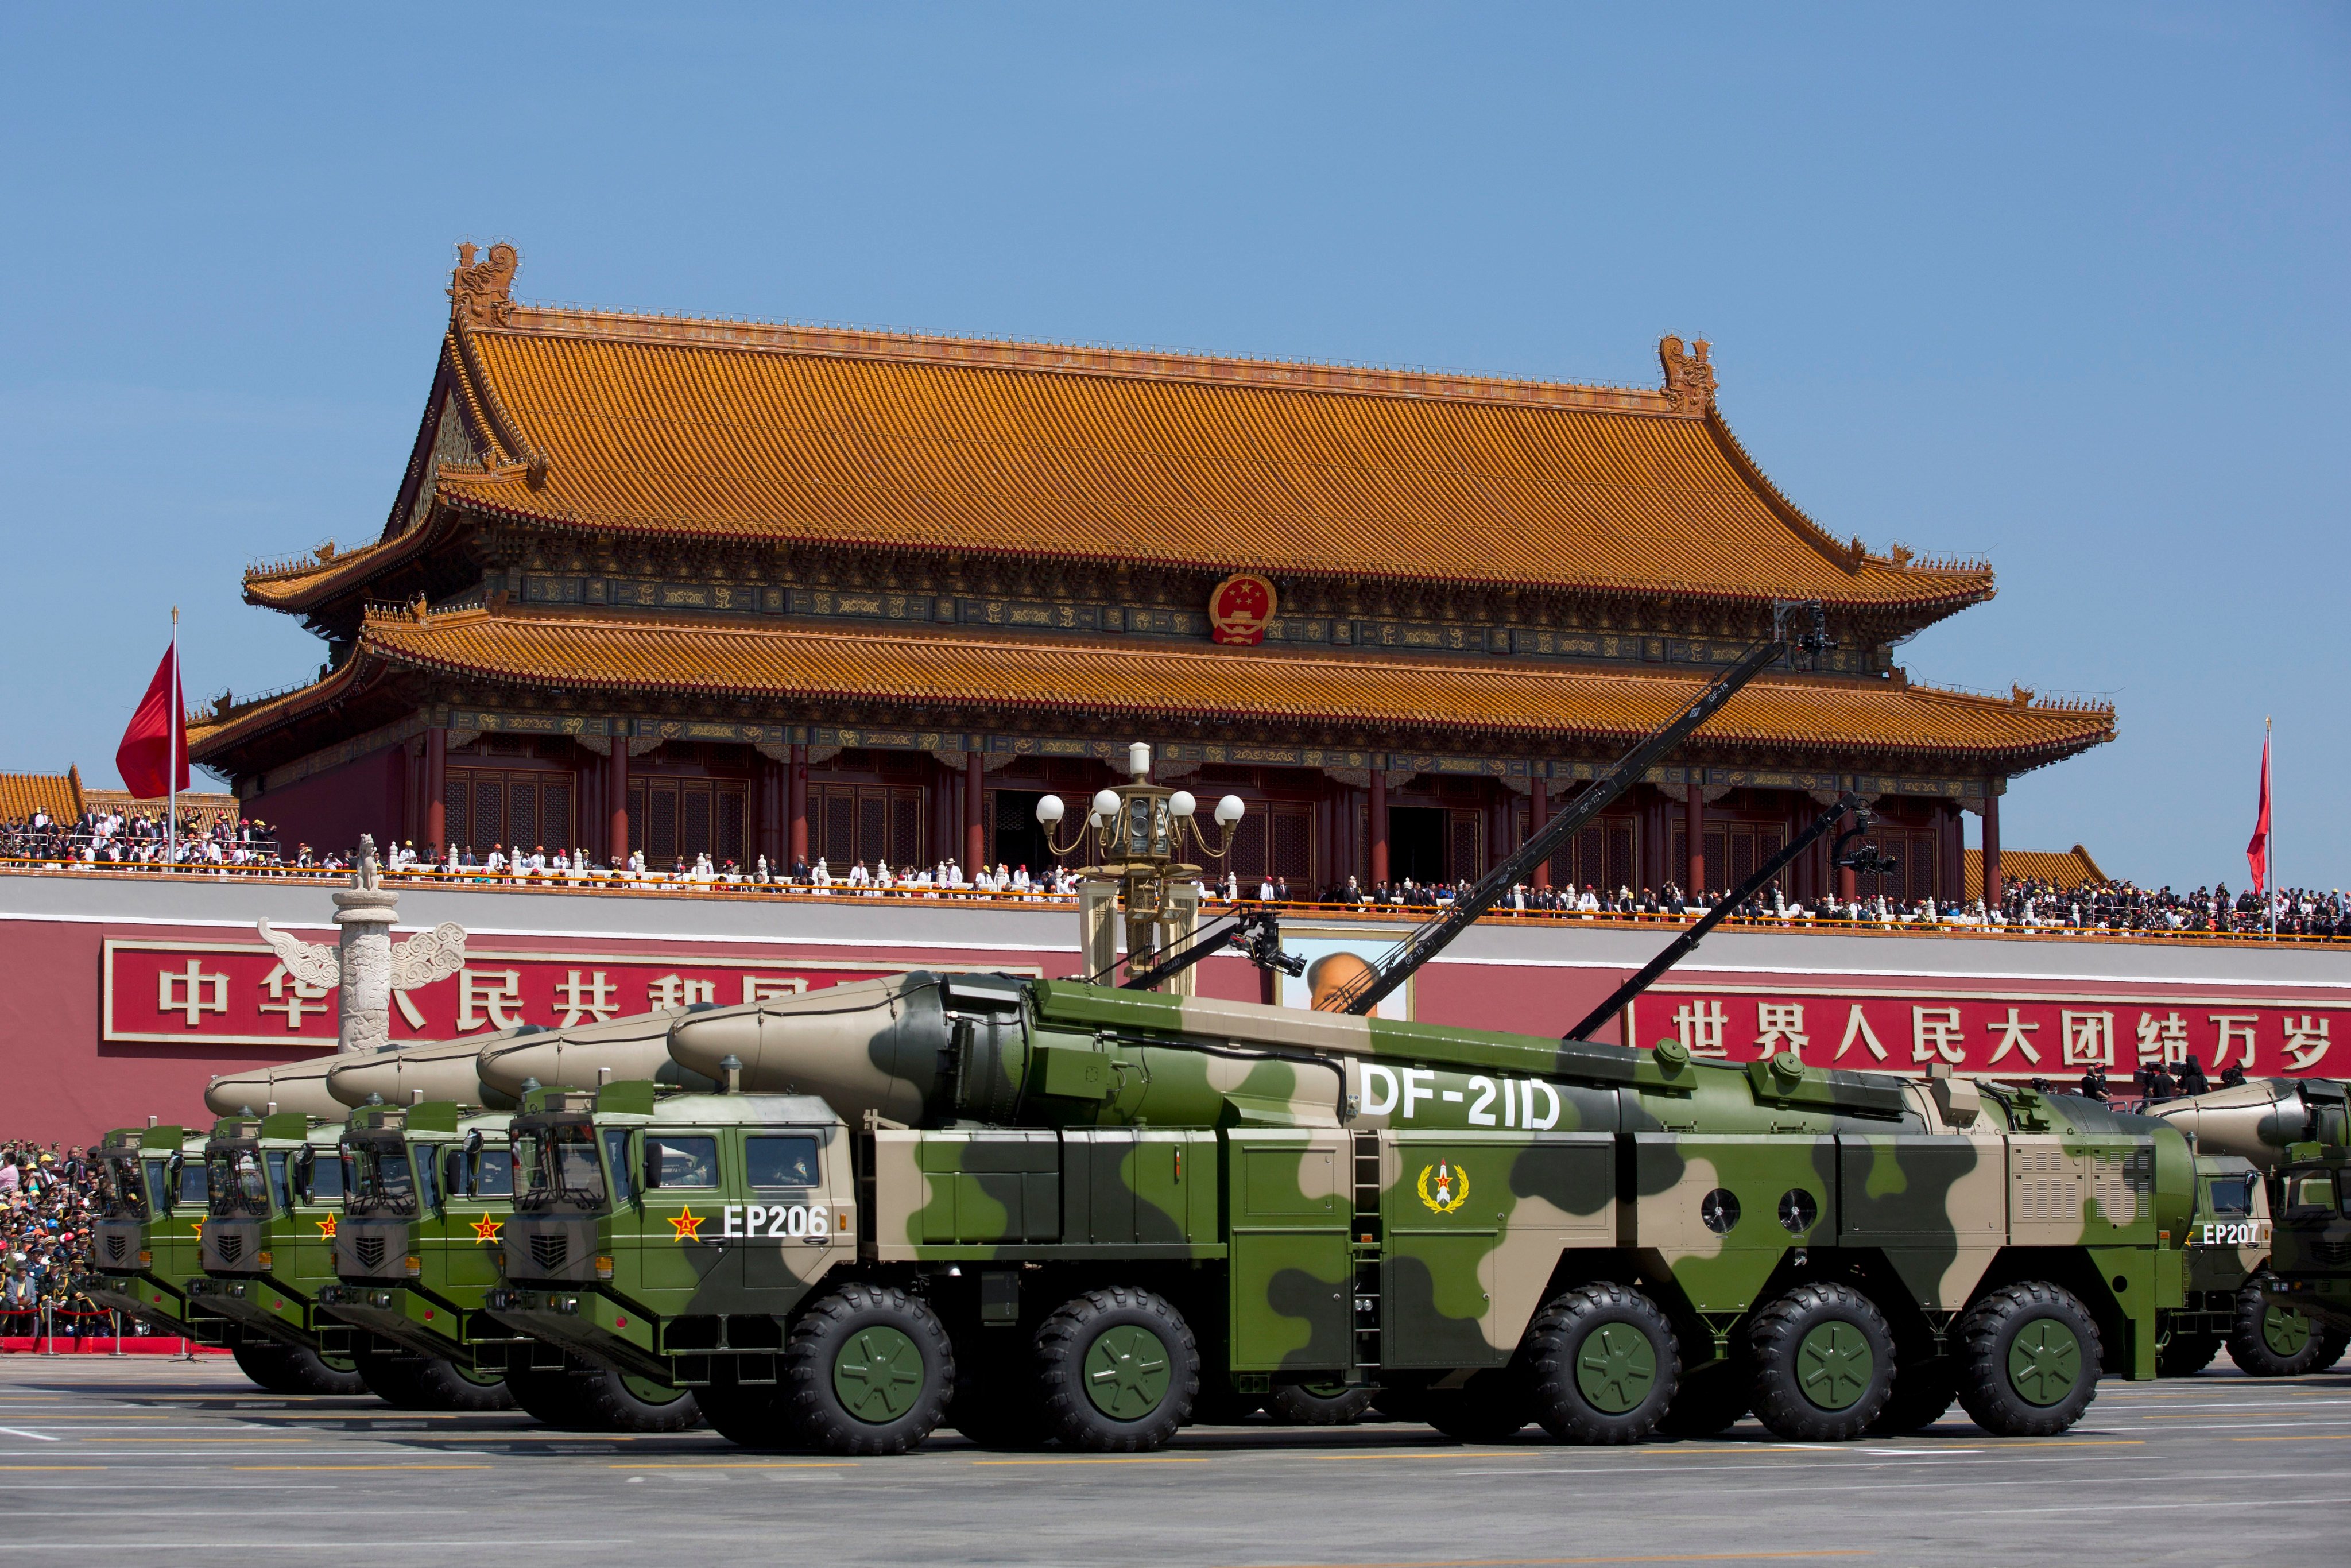 Beijing has announced an increase in its military budget similar to last year. But Taiwan is still feeling the pressure, as it prepares its troops for a potential cross-strait war. Photo: AP